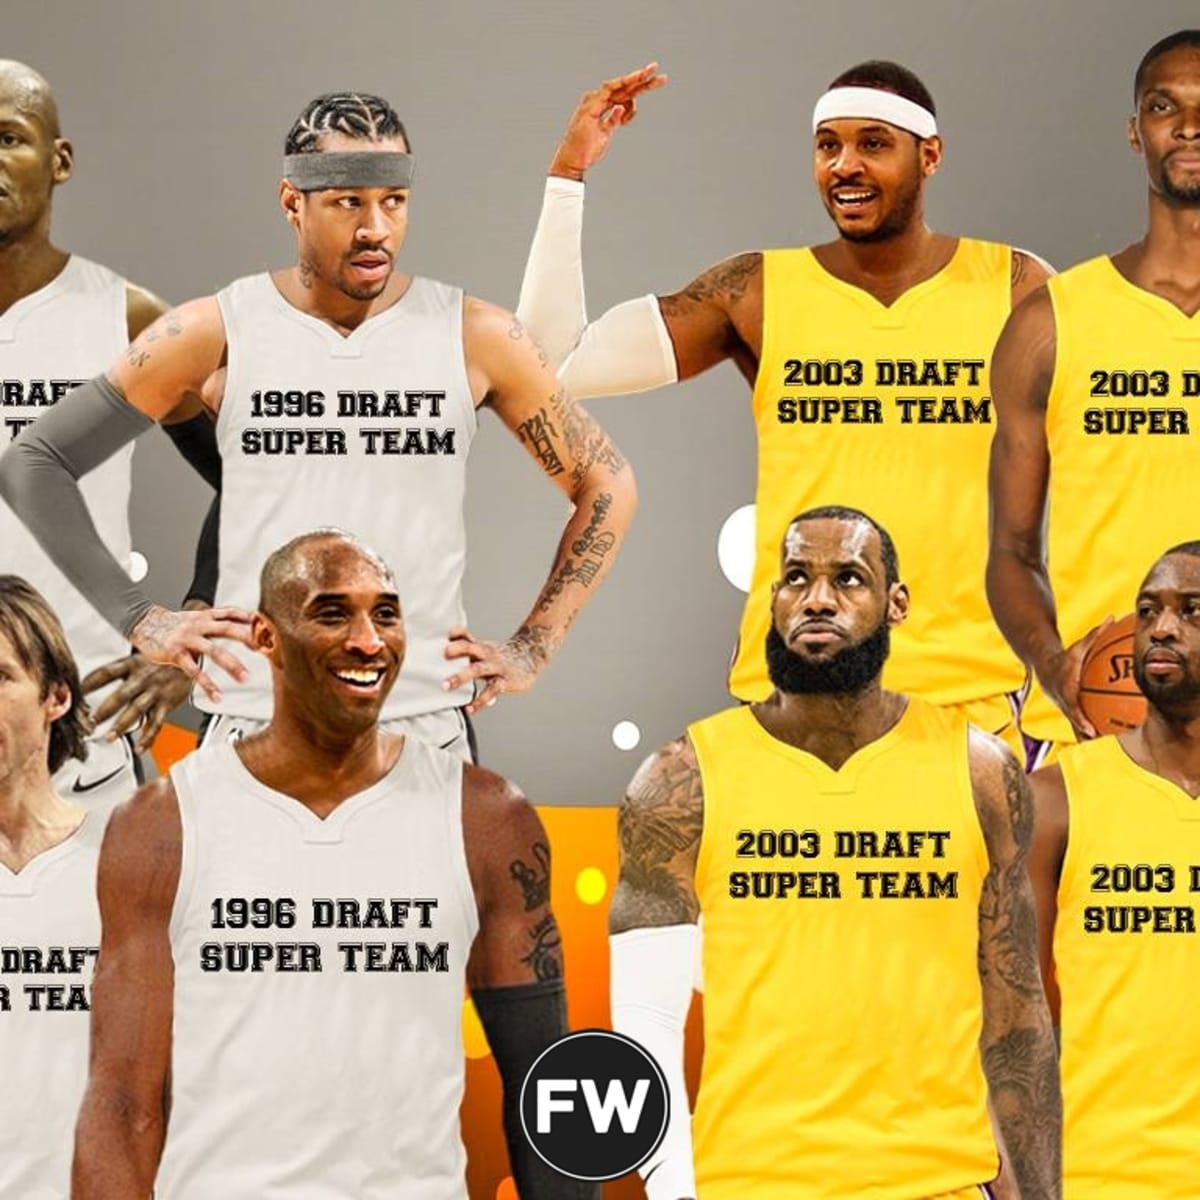 Will the 1996 NBA draft class go down as the best ever?